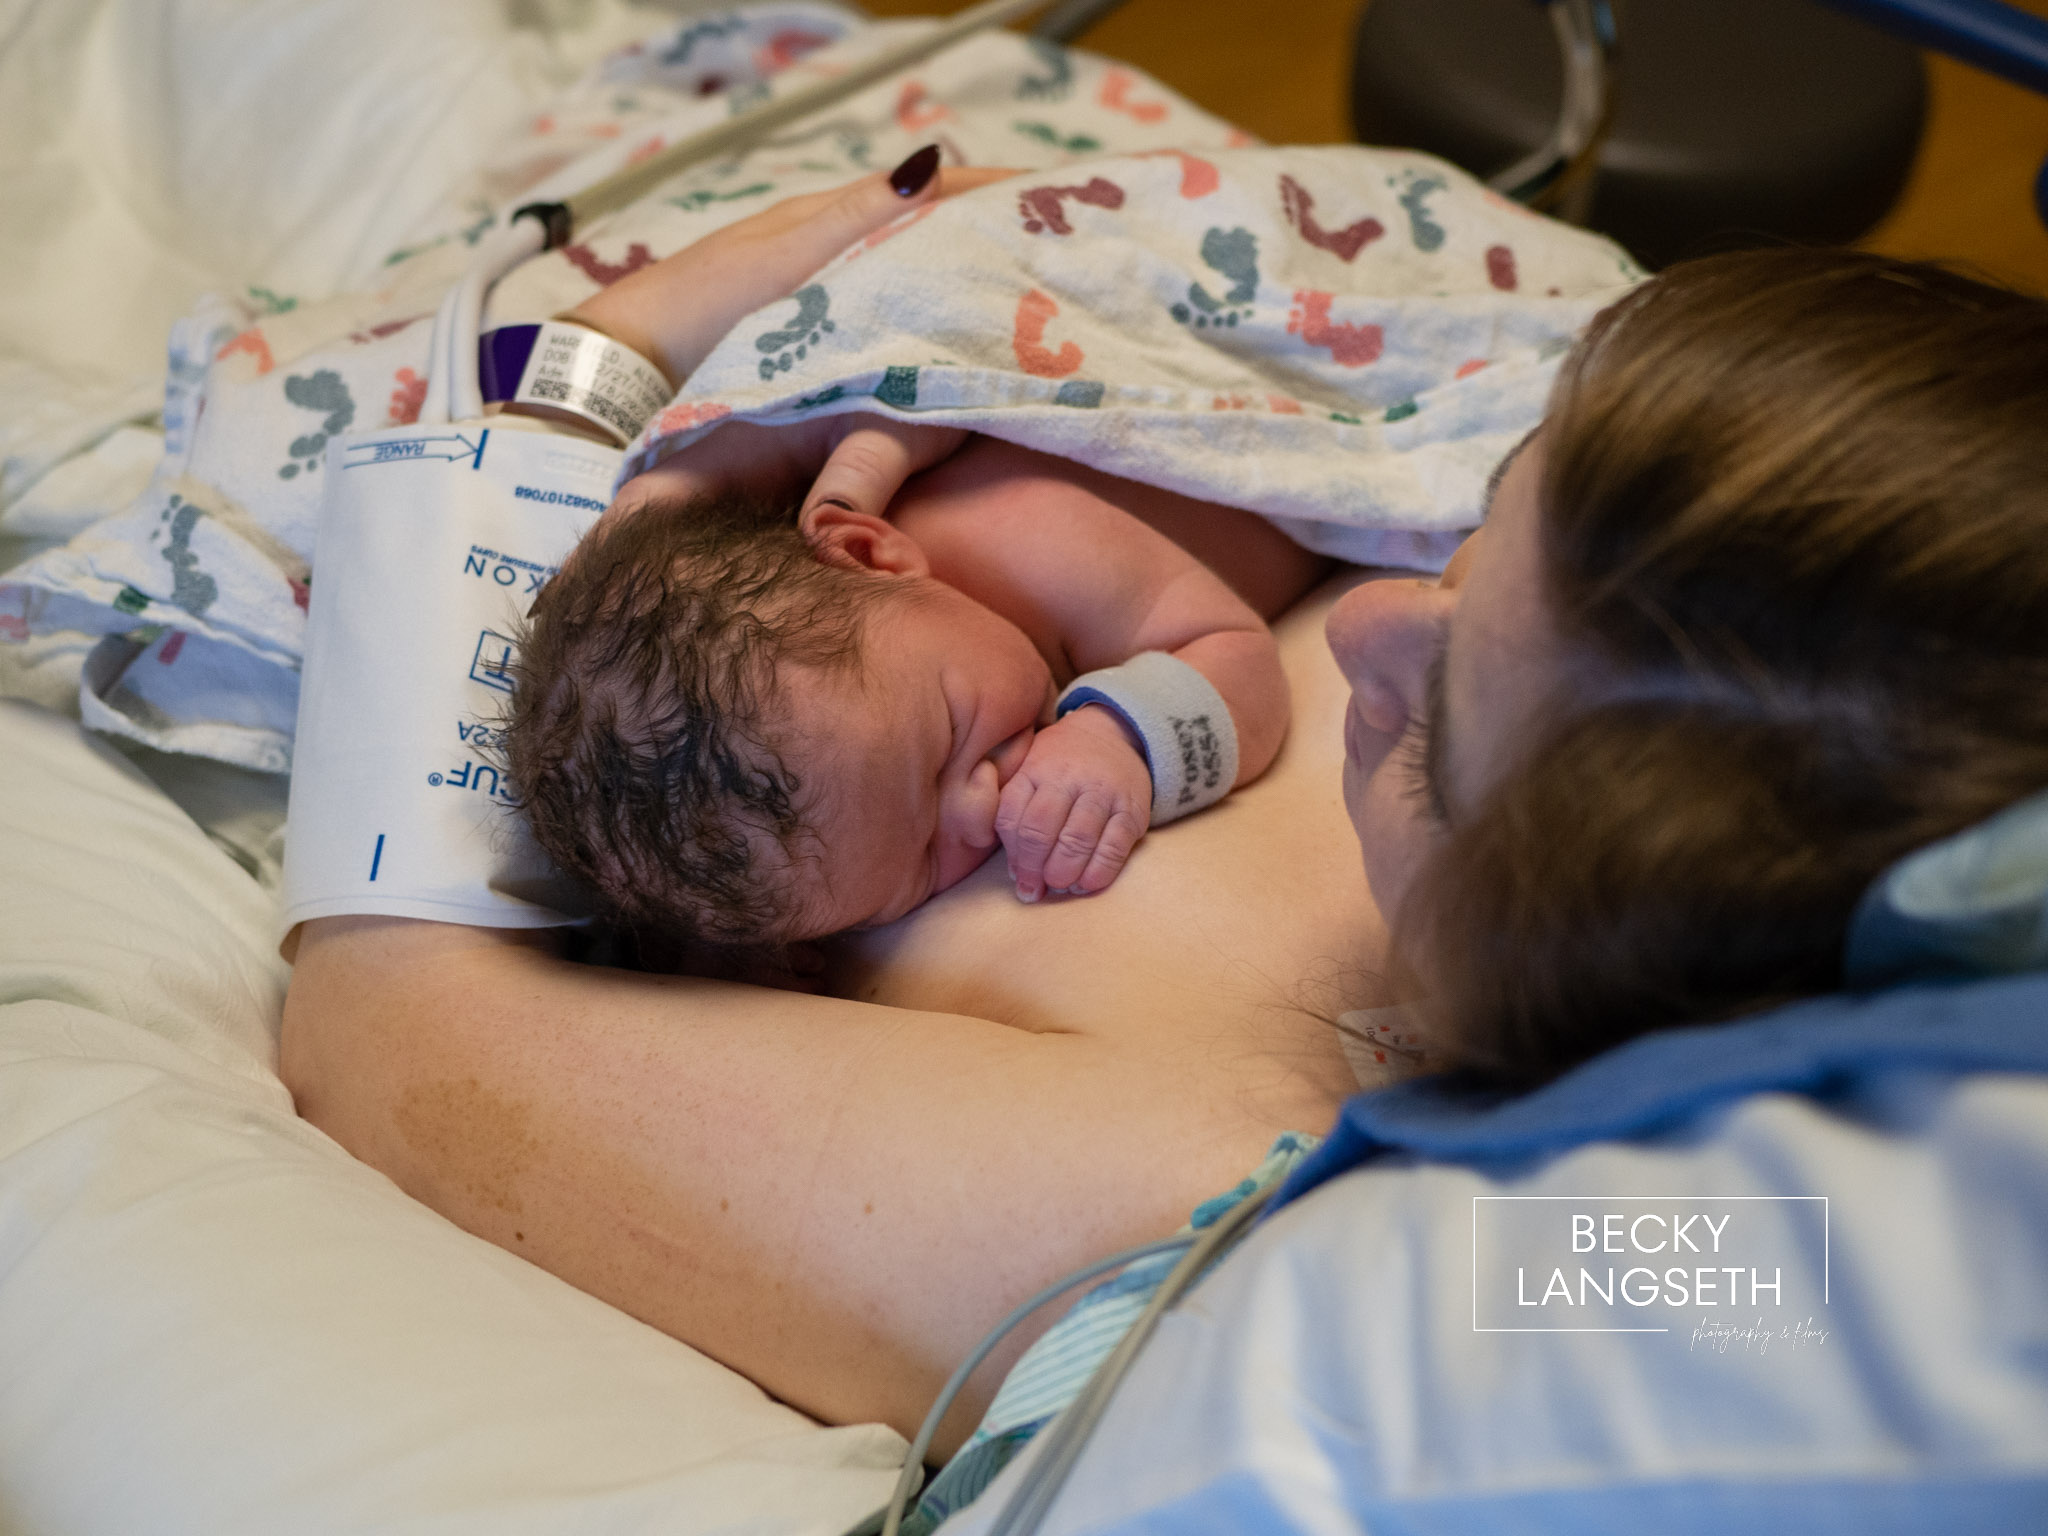 A new mother holds her baby doing skin-to-skin for the first time after a cesarian birth at Swedish Issaquah Hospital.